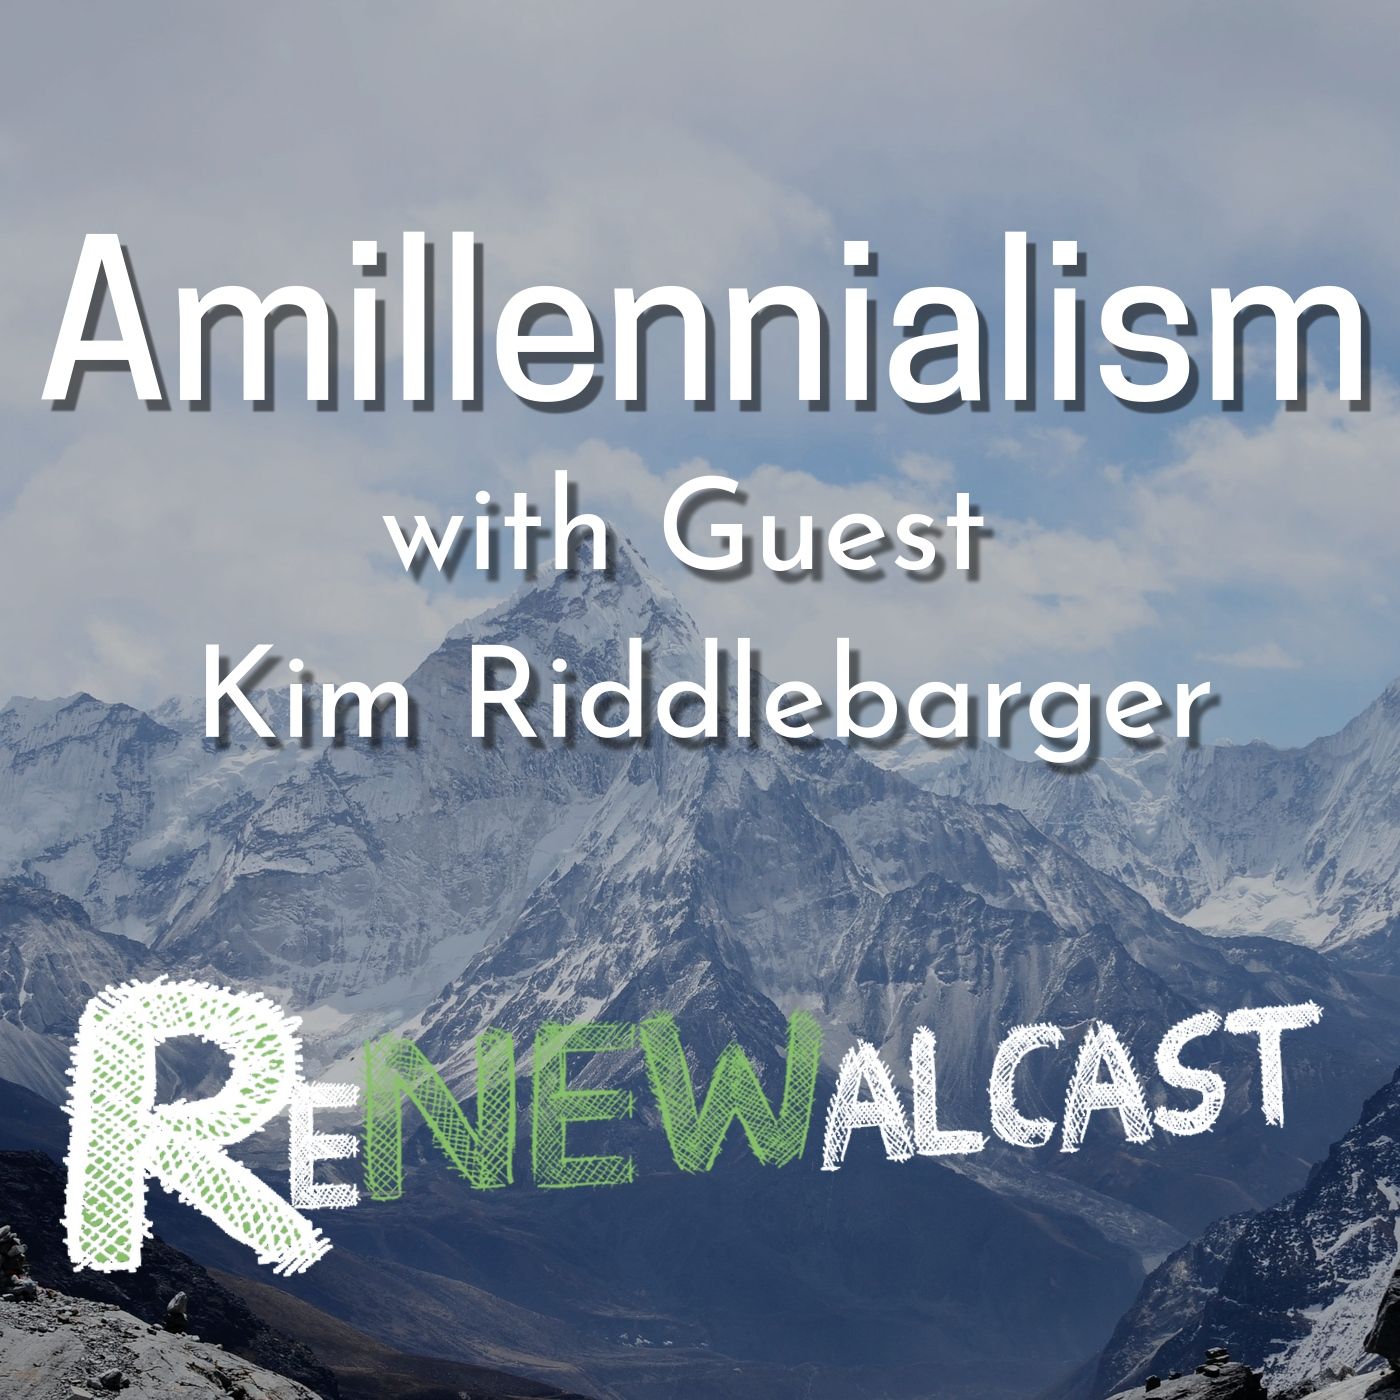 Amillennialism with Guest Kim Riddlebarger